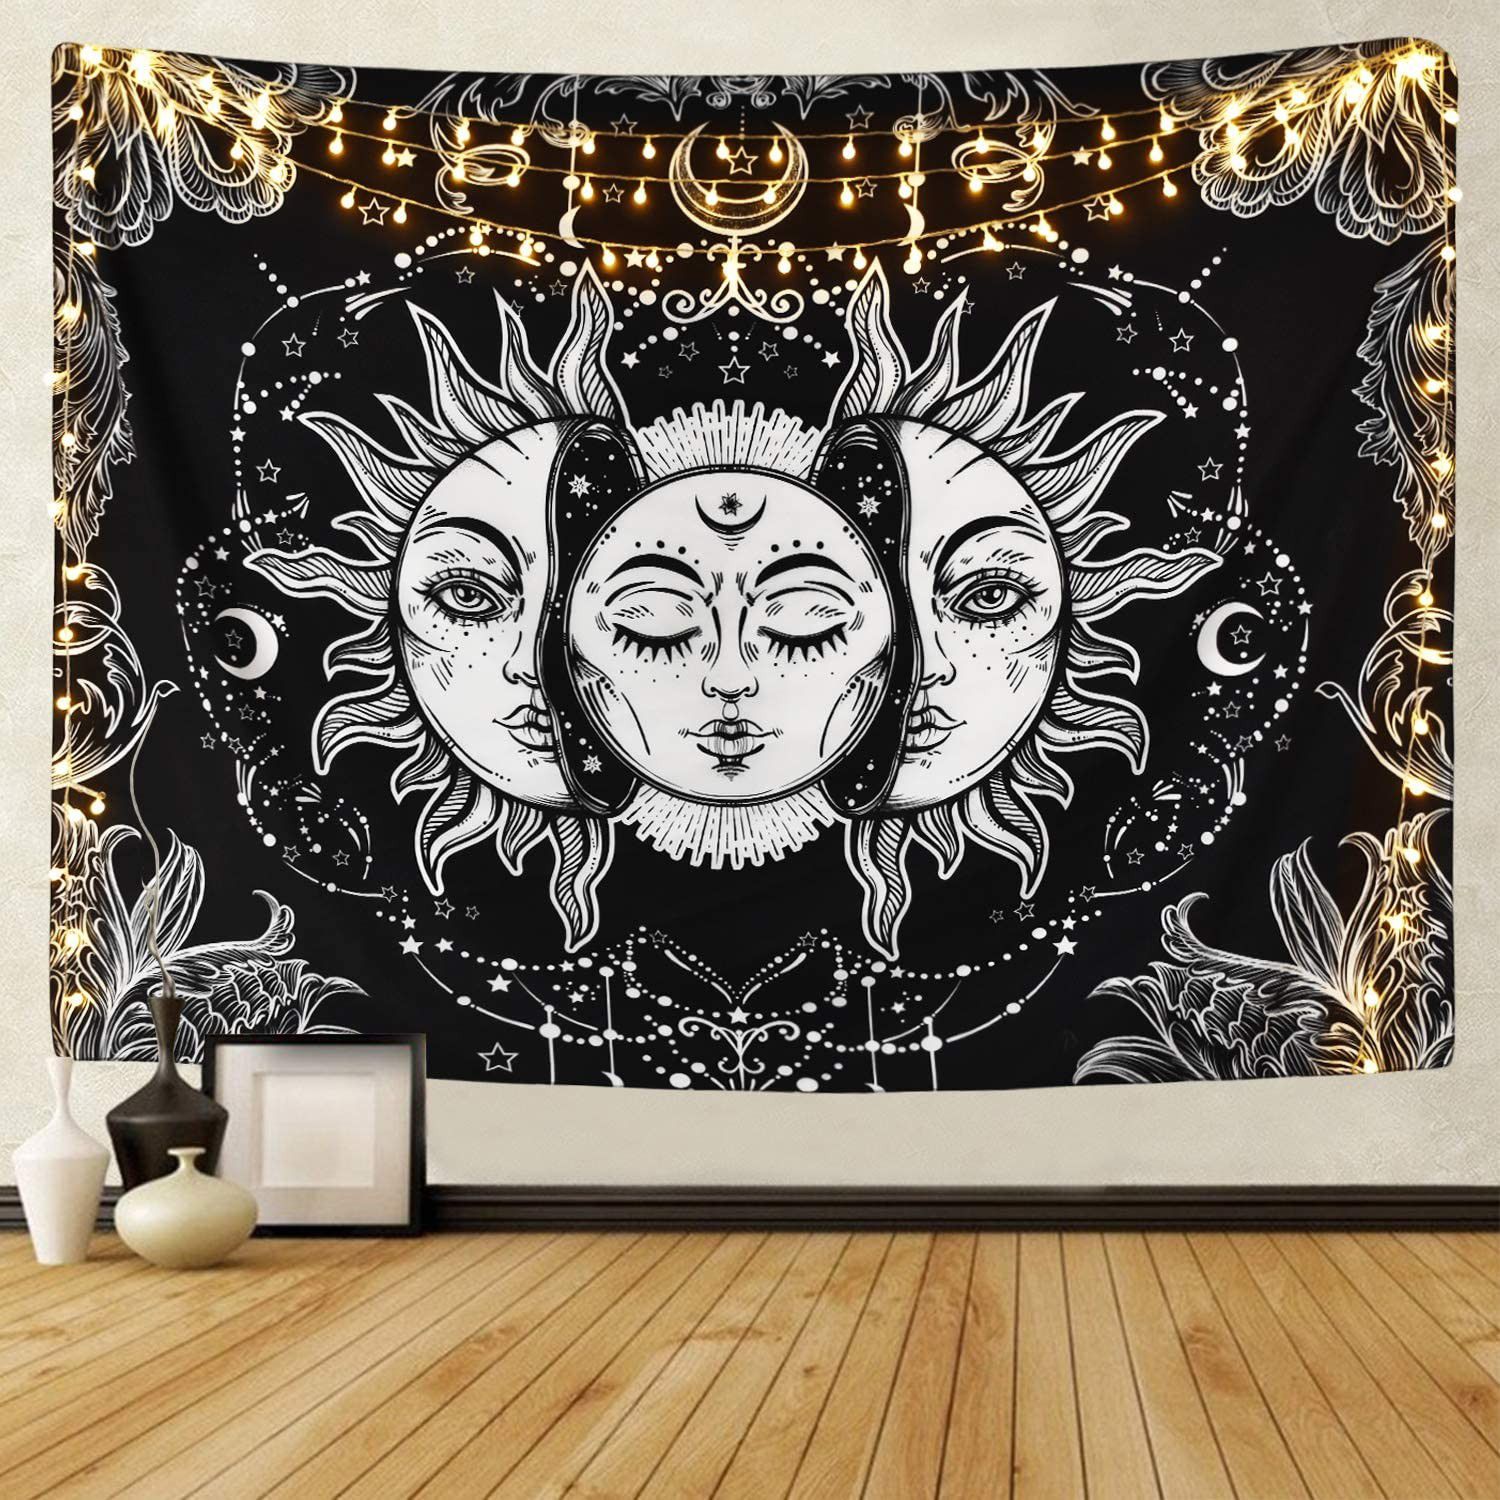 Brand New Sun Moon Wall Tapestry Fabric Burning Star Psychedelic Black White Mystic Home Bedroom Bedding Picnic Porch Blanket Couch Balcony Decor